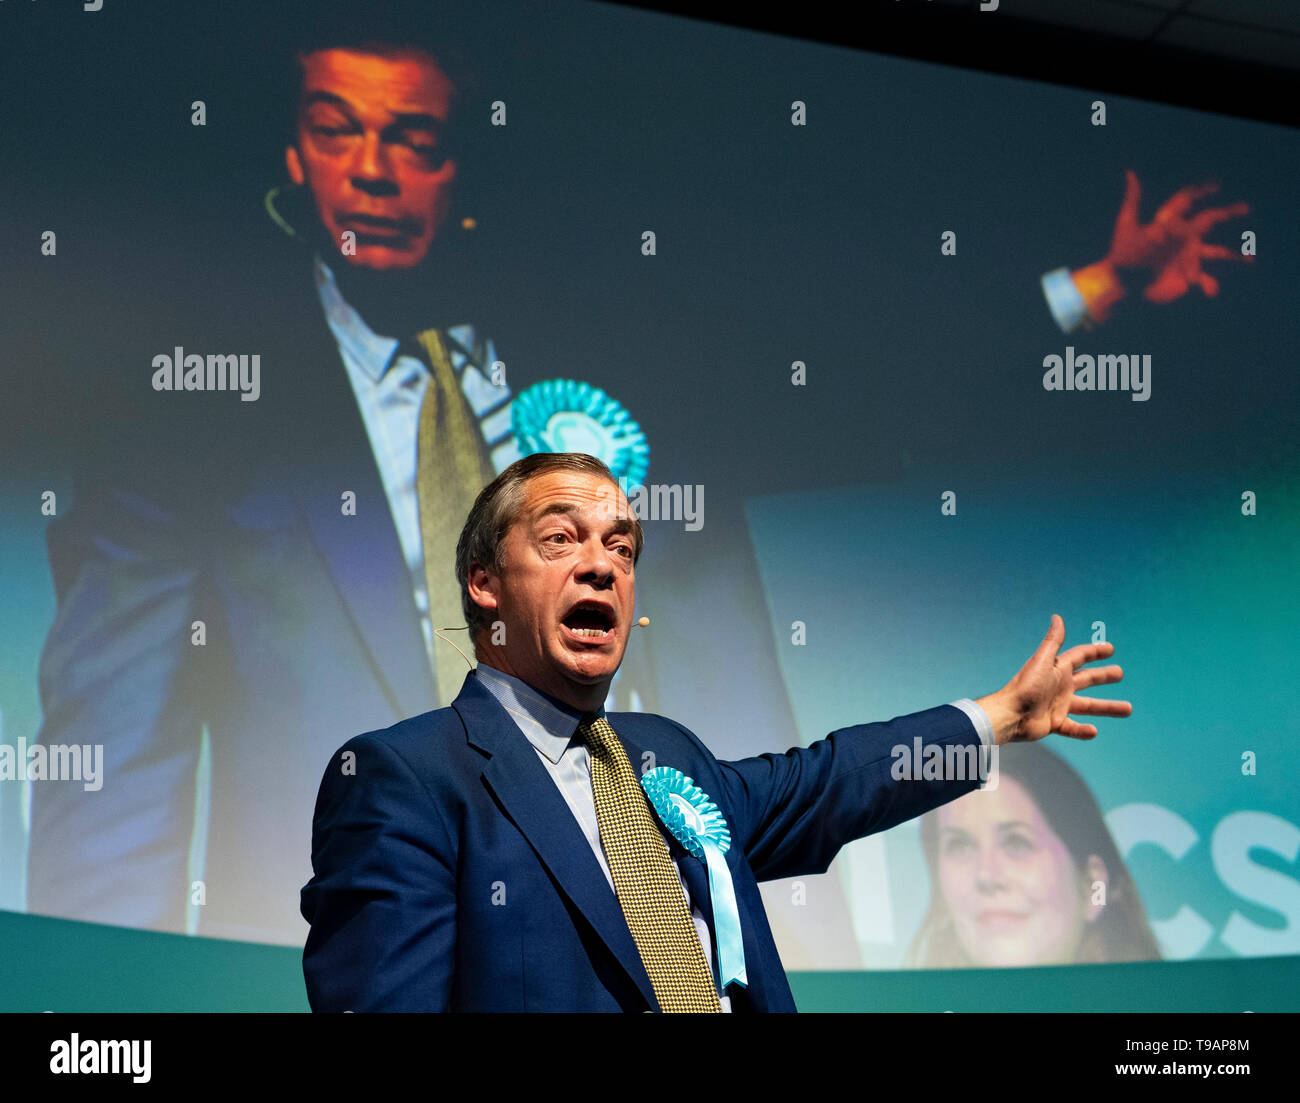 Edinburgh, Scotland, UK. 17th May, 2019. Nigel Farage in Edinburgh for a rally with the Brexit Party's European election candidates. Held at the Corn Exchange in the city. Credit: Iain Masterton/Alamy Live News Stock Photo